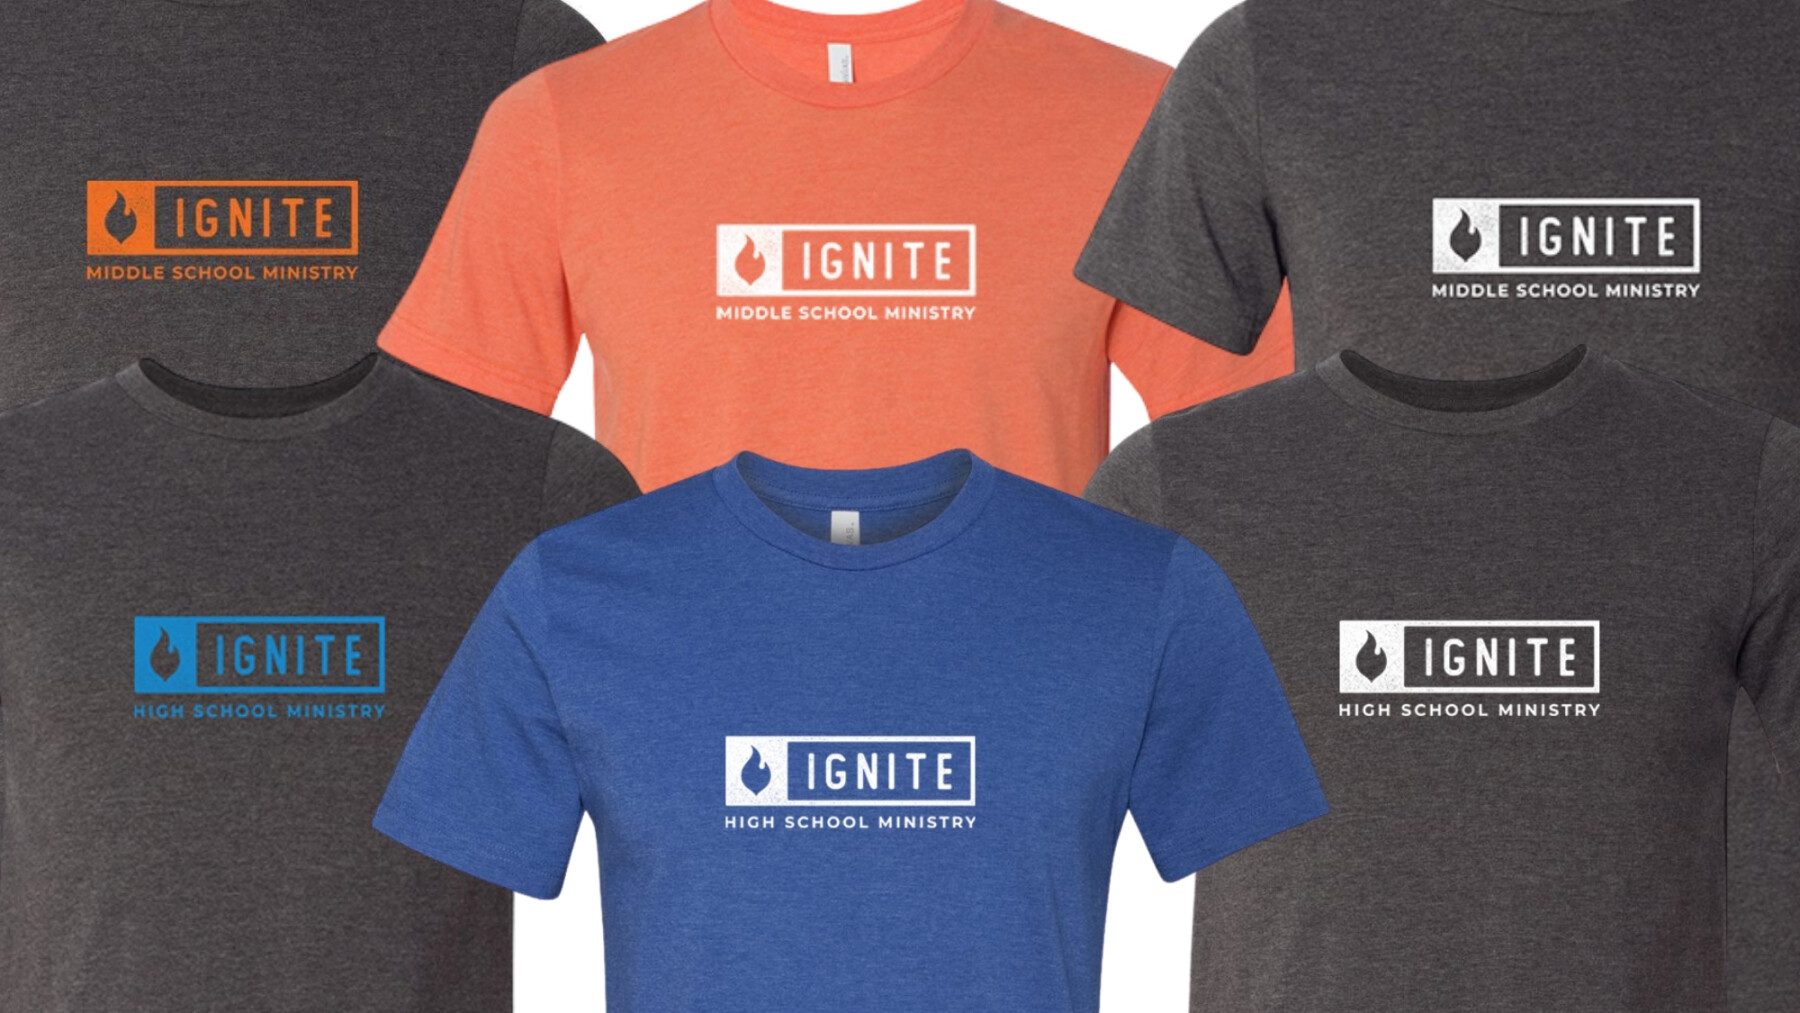 Ignite Youth Ministry - T-shirt Sale